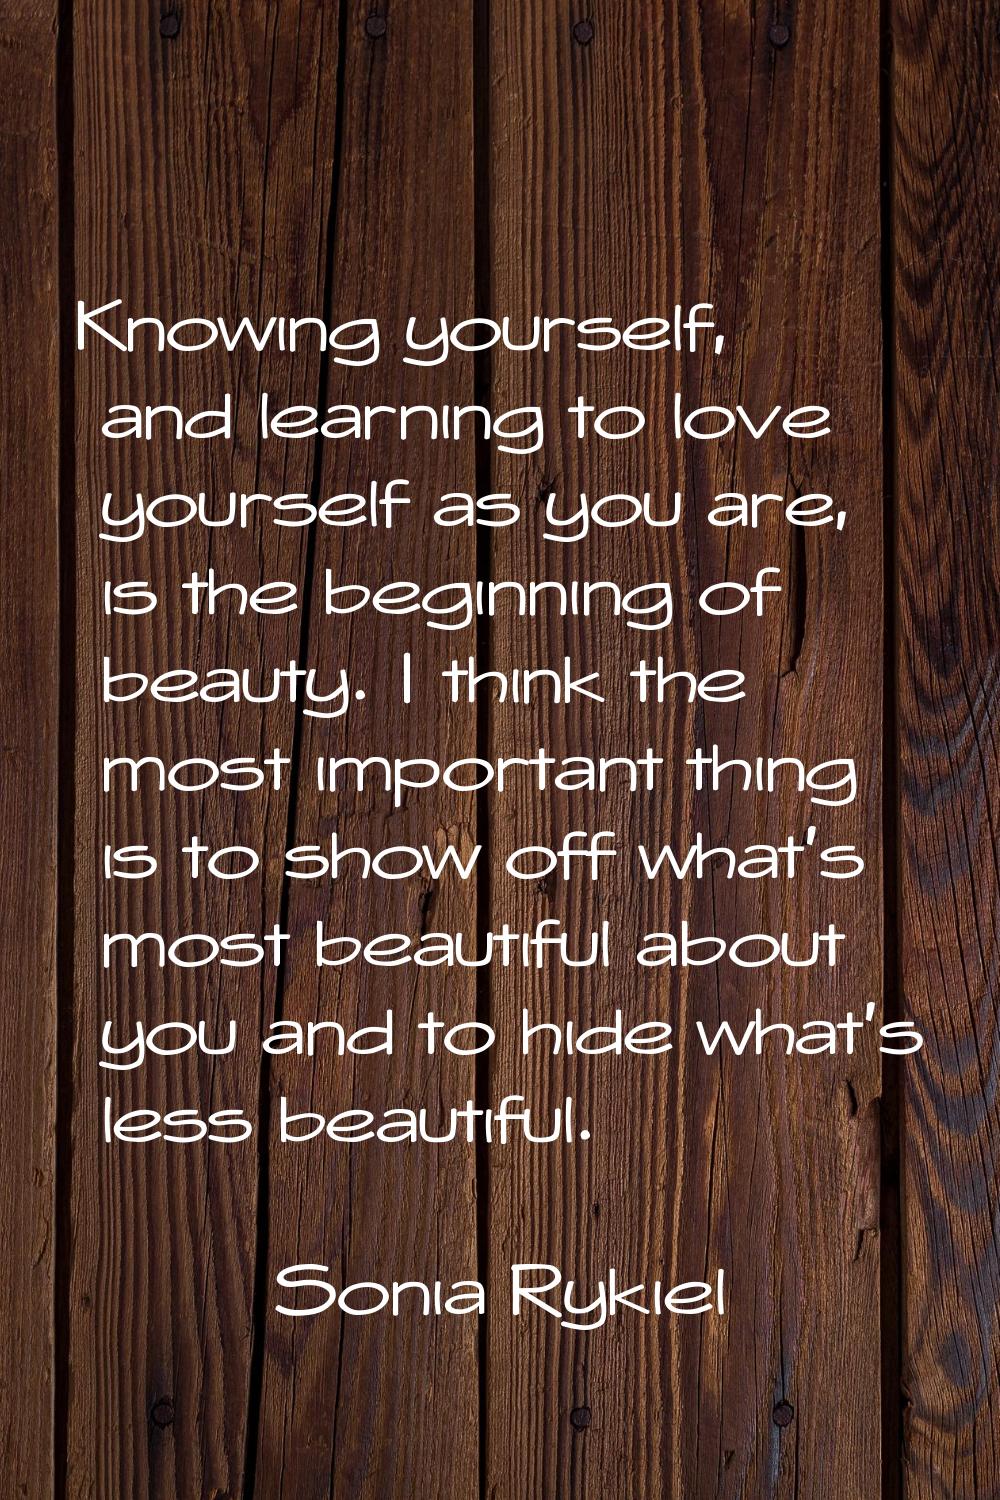 Knowing yourself, and learning to love yourself as you are, is the beginning of beauty. I think the